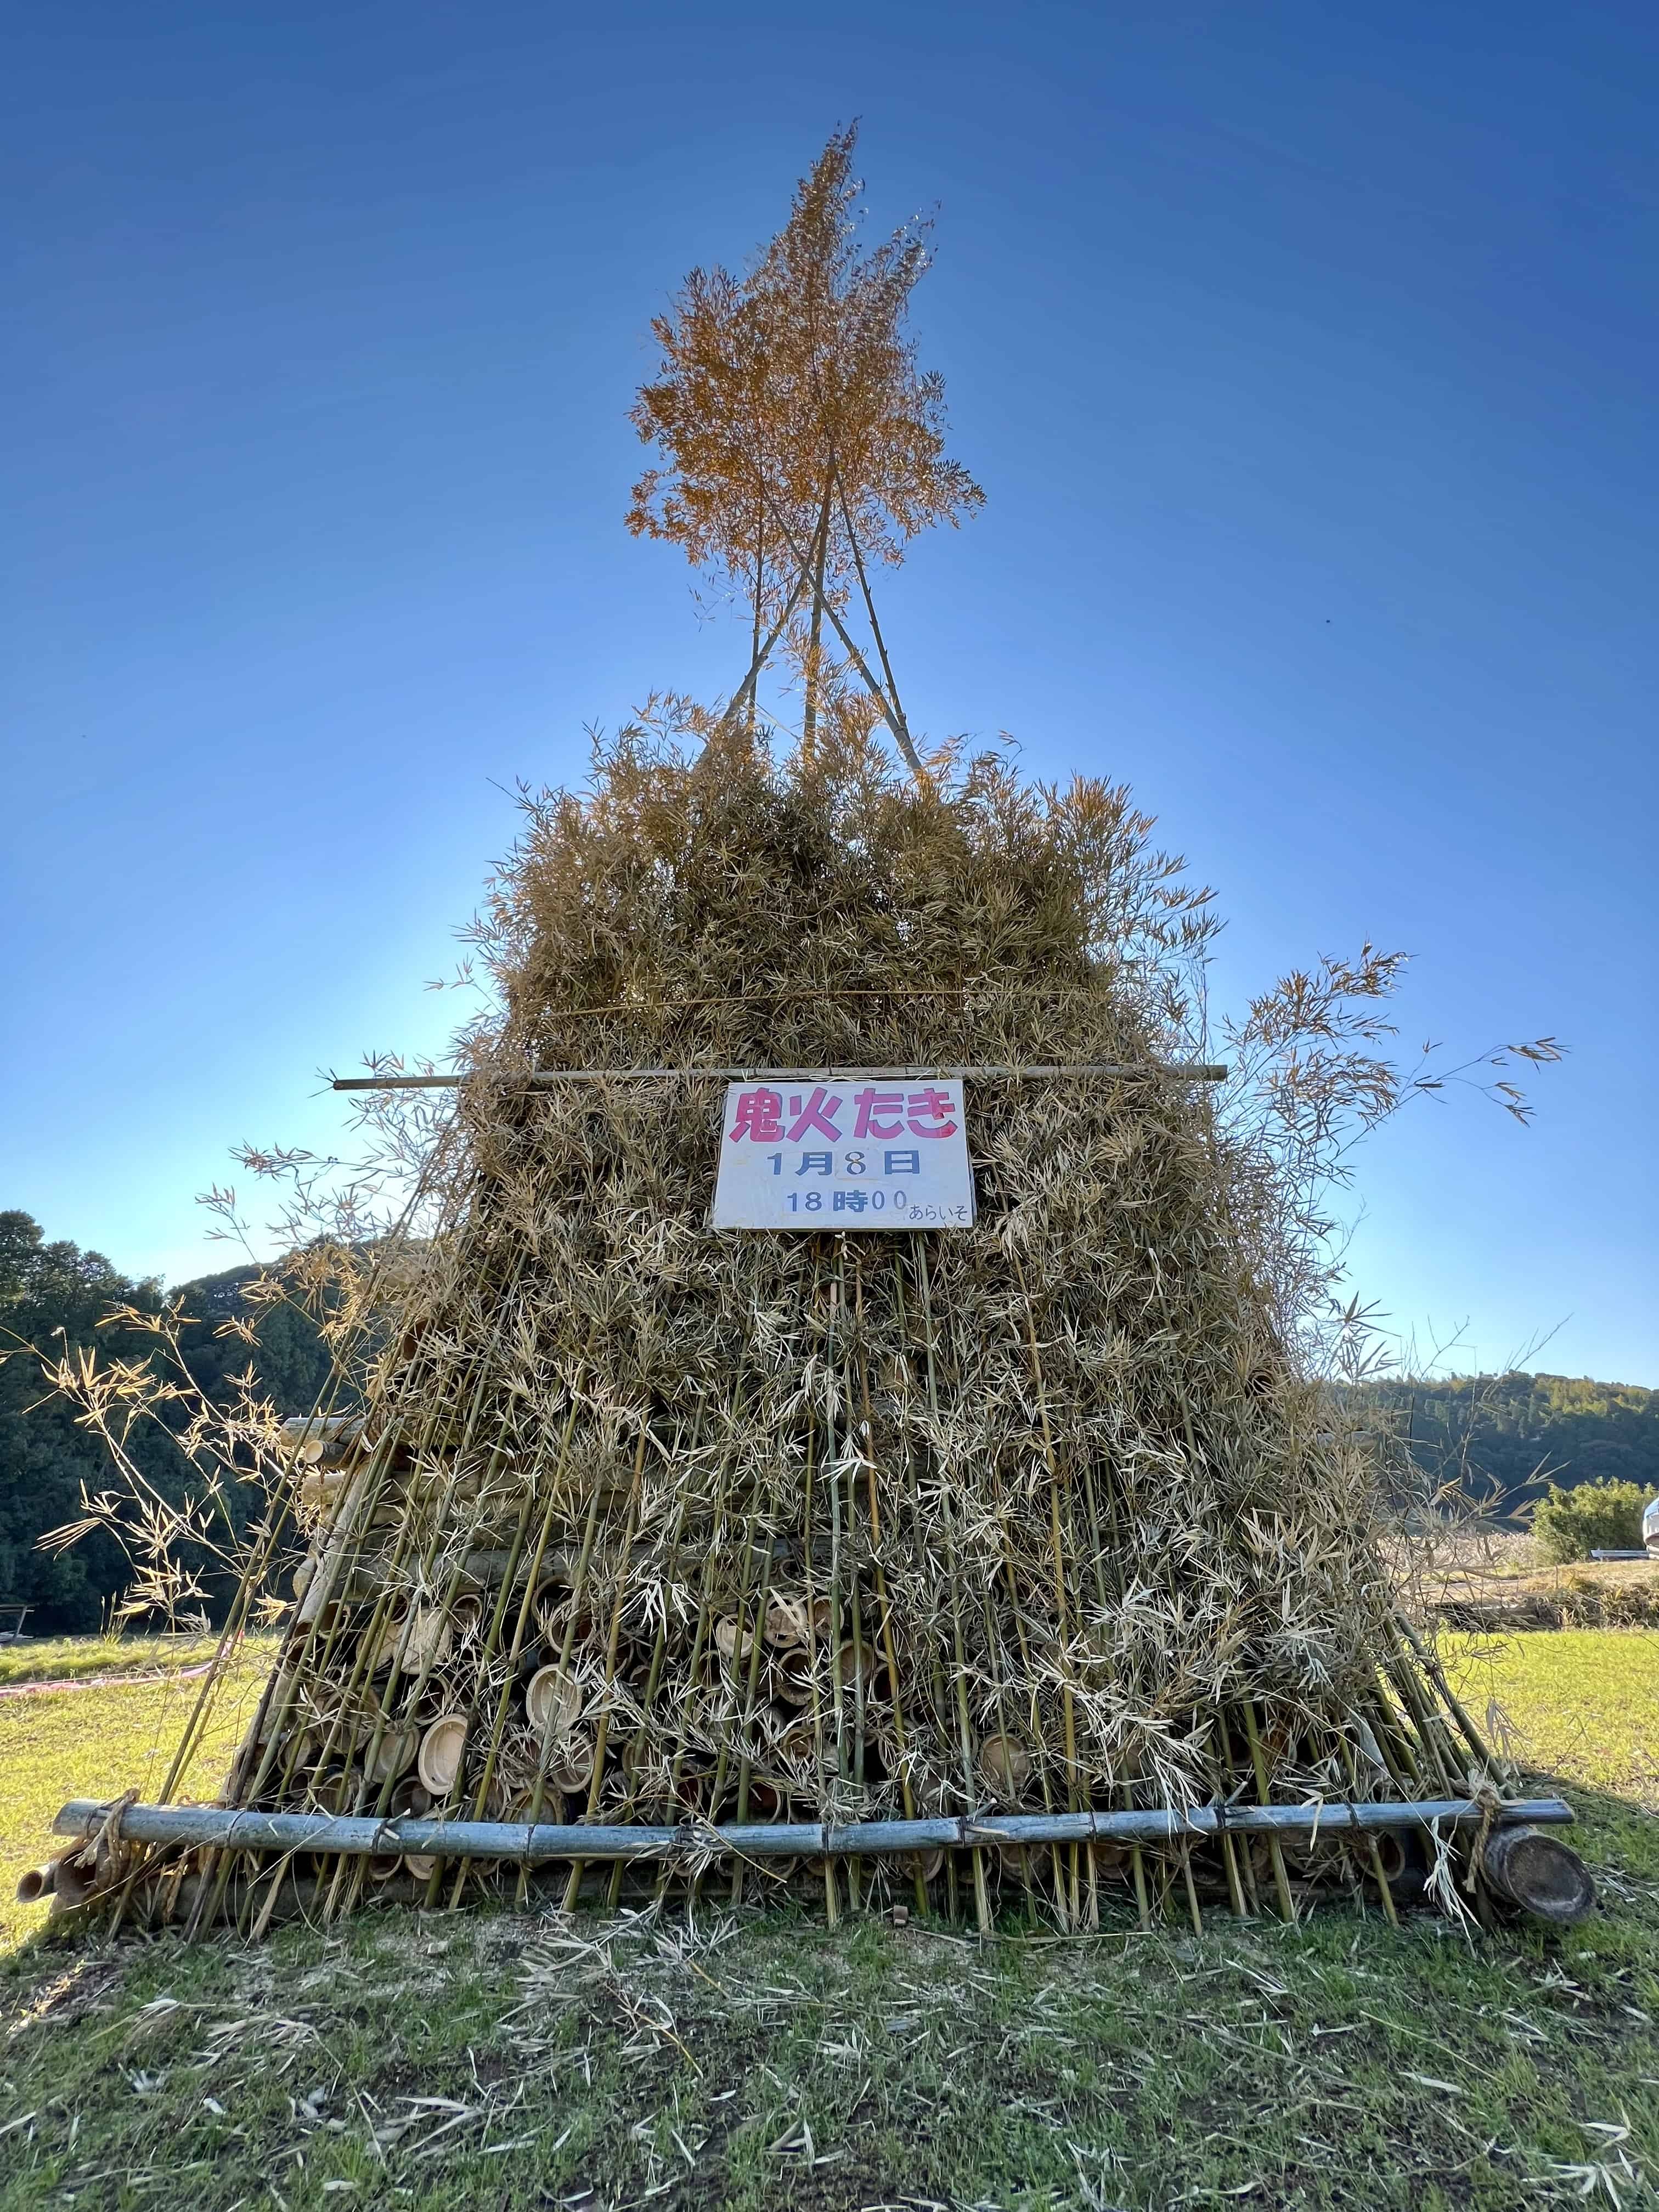 Ready for bonfire to banish demons — bamboo piled in the middle of a ricefield.